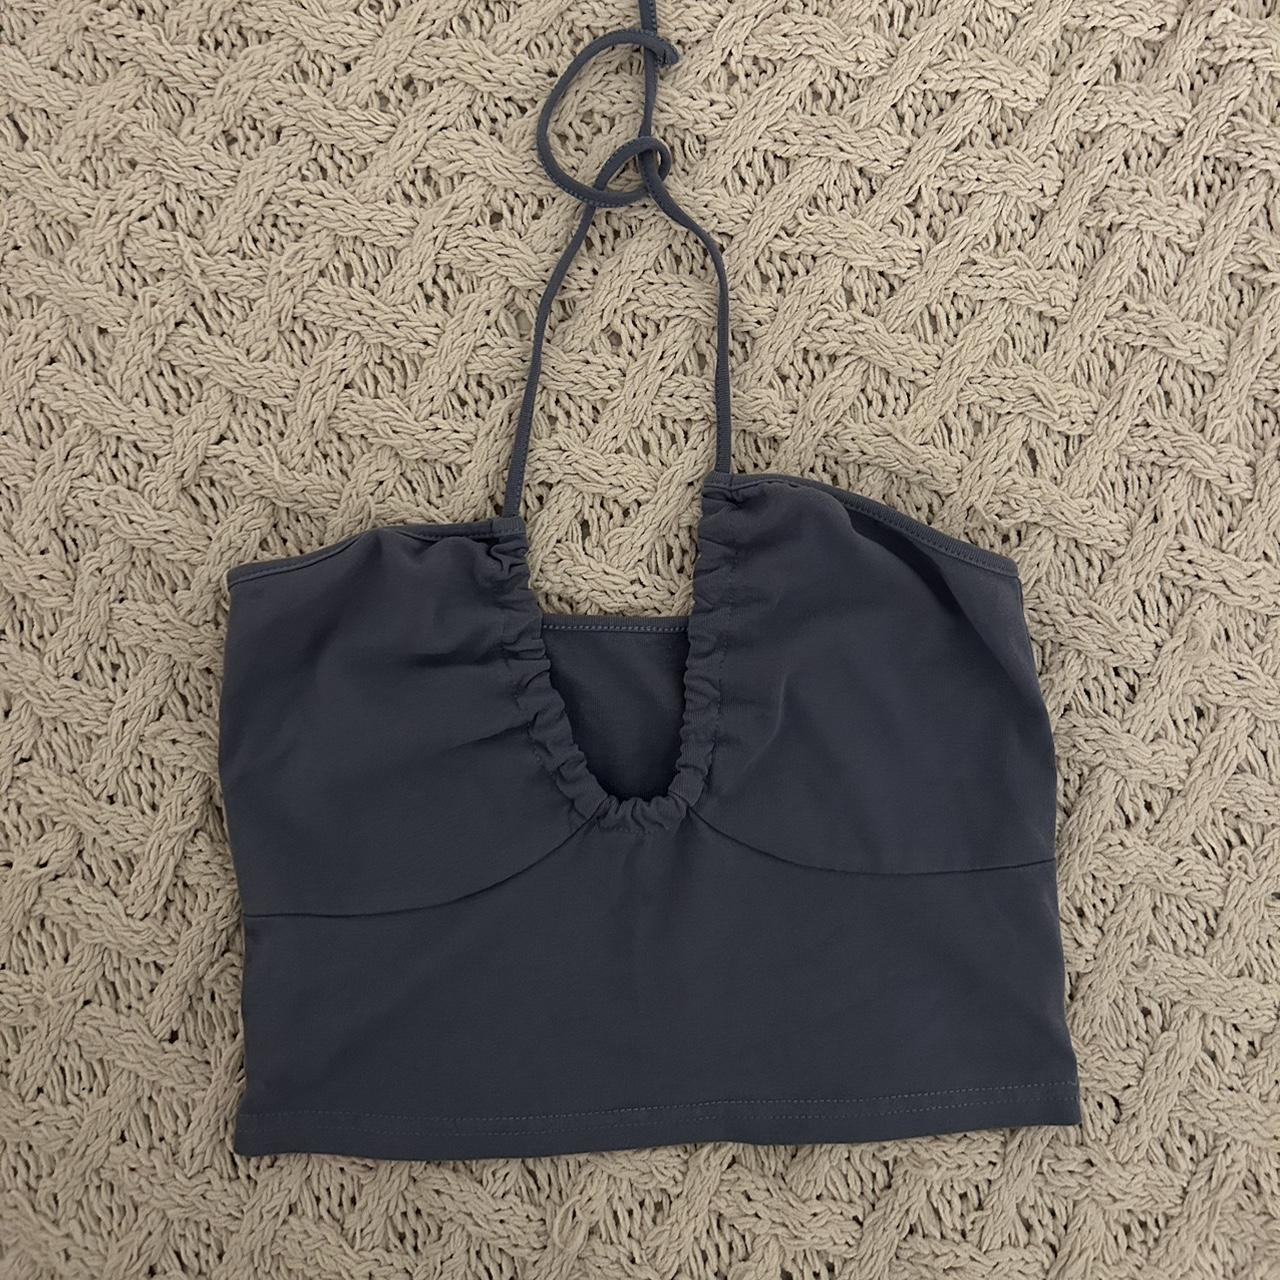 PacSun Women's Pink and Blue Crop-top (7)